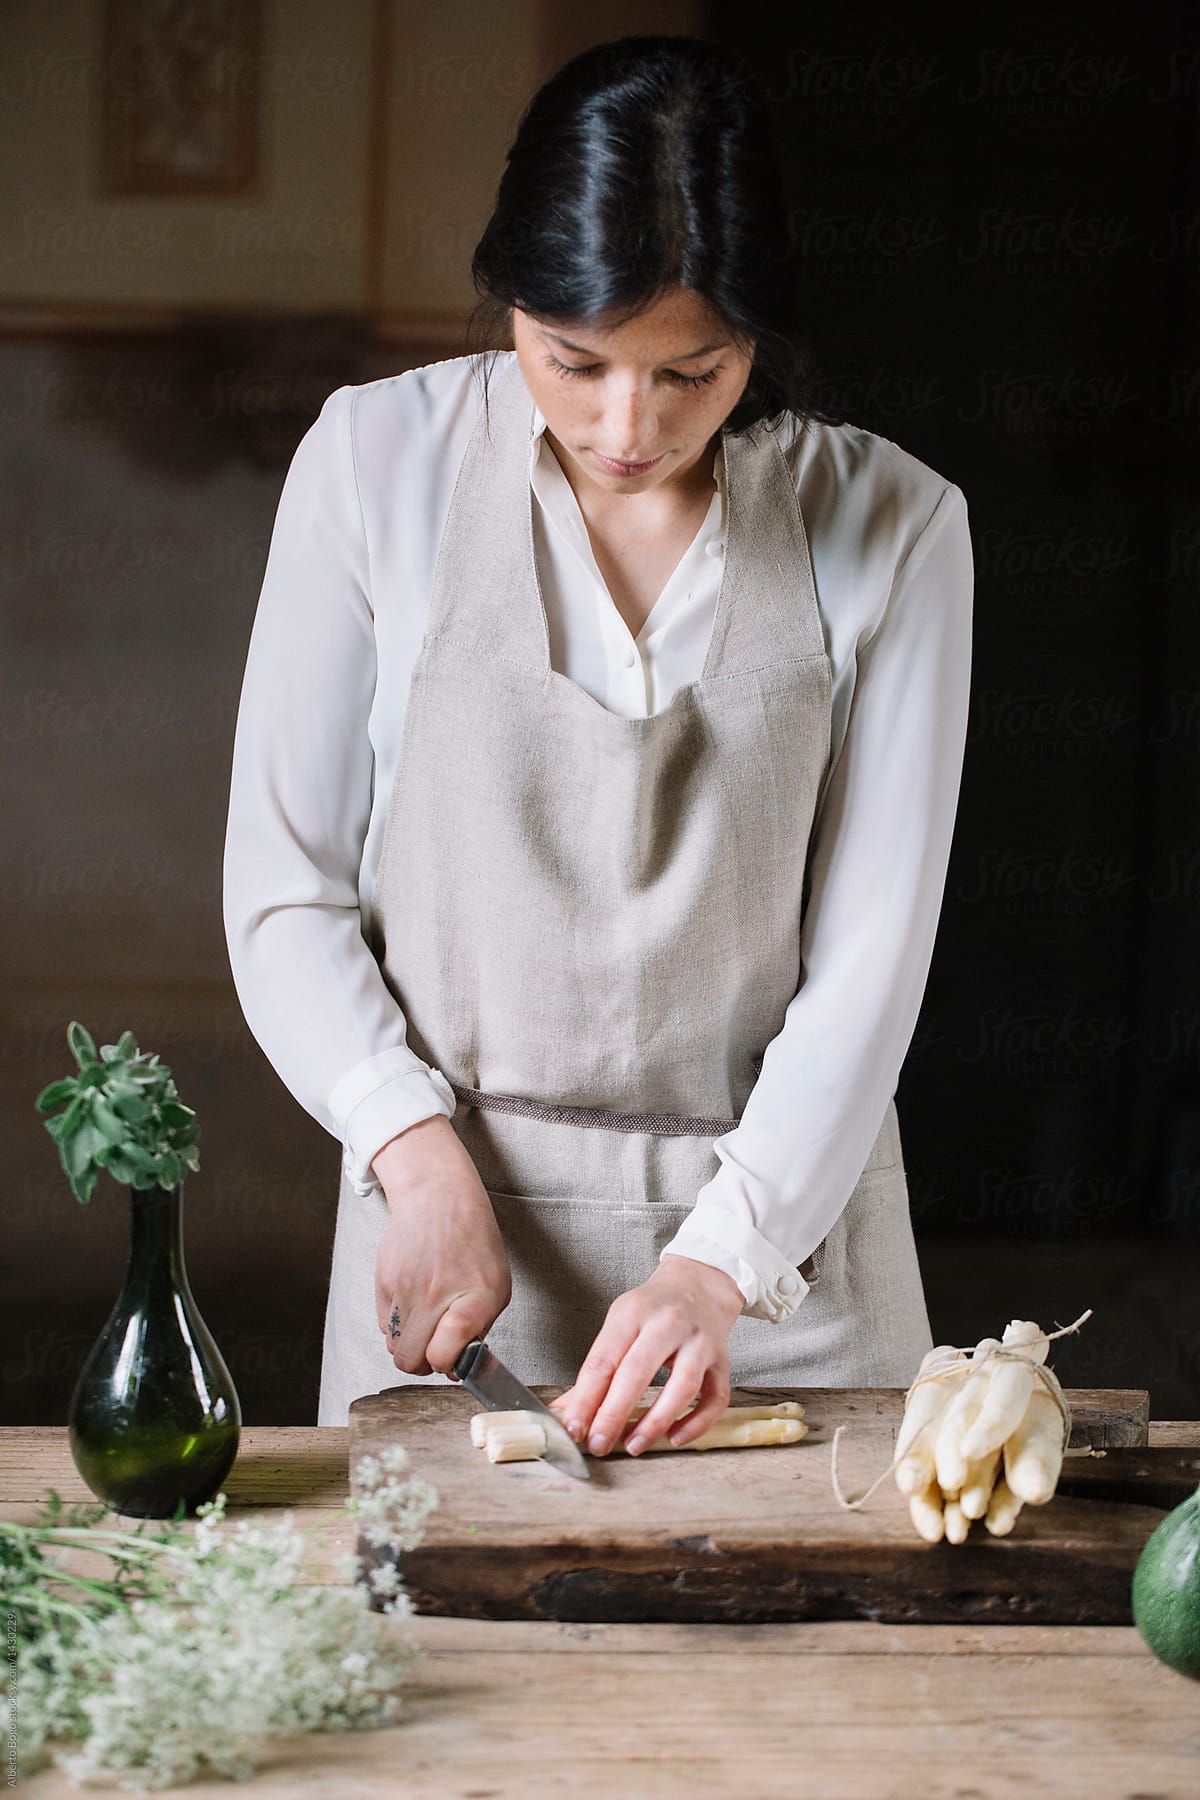 Woman cutting vegetable